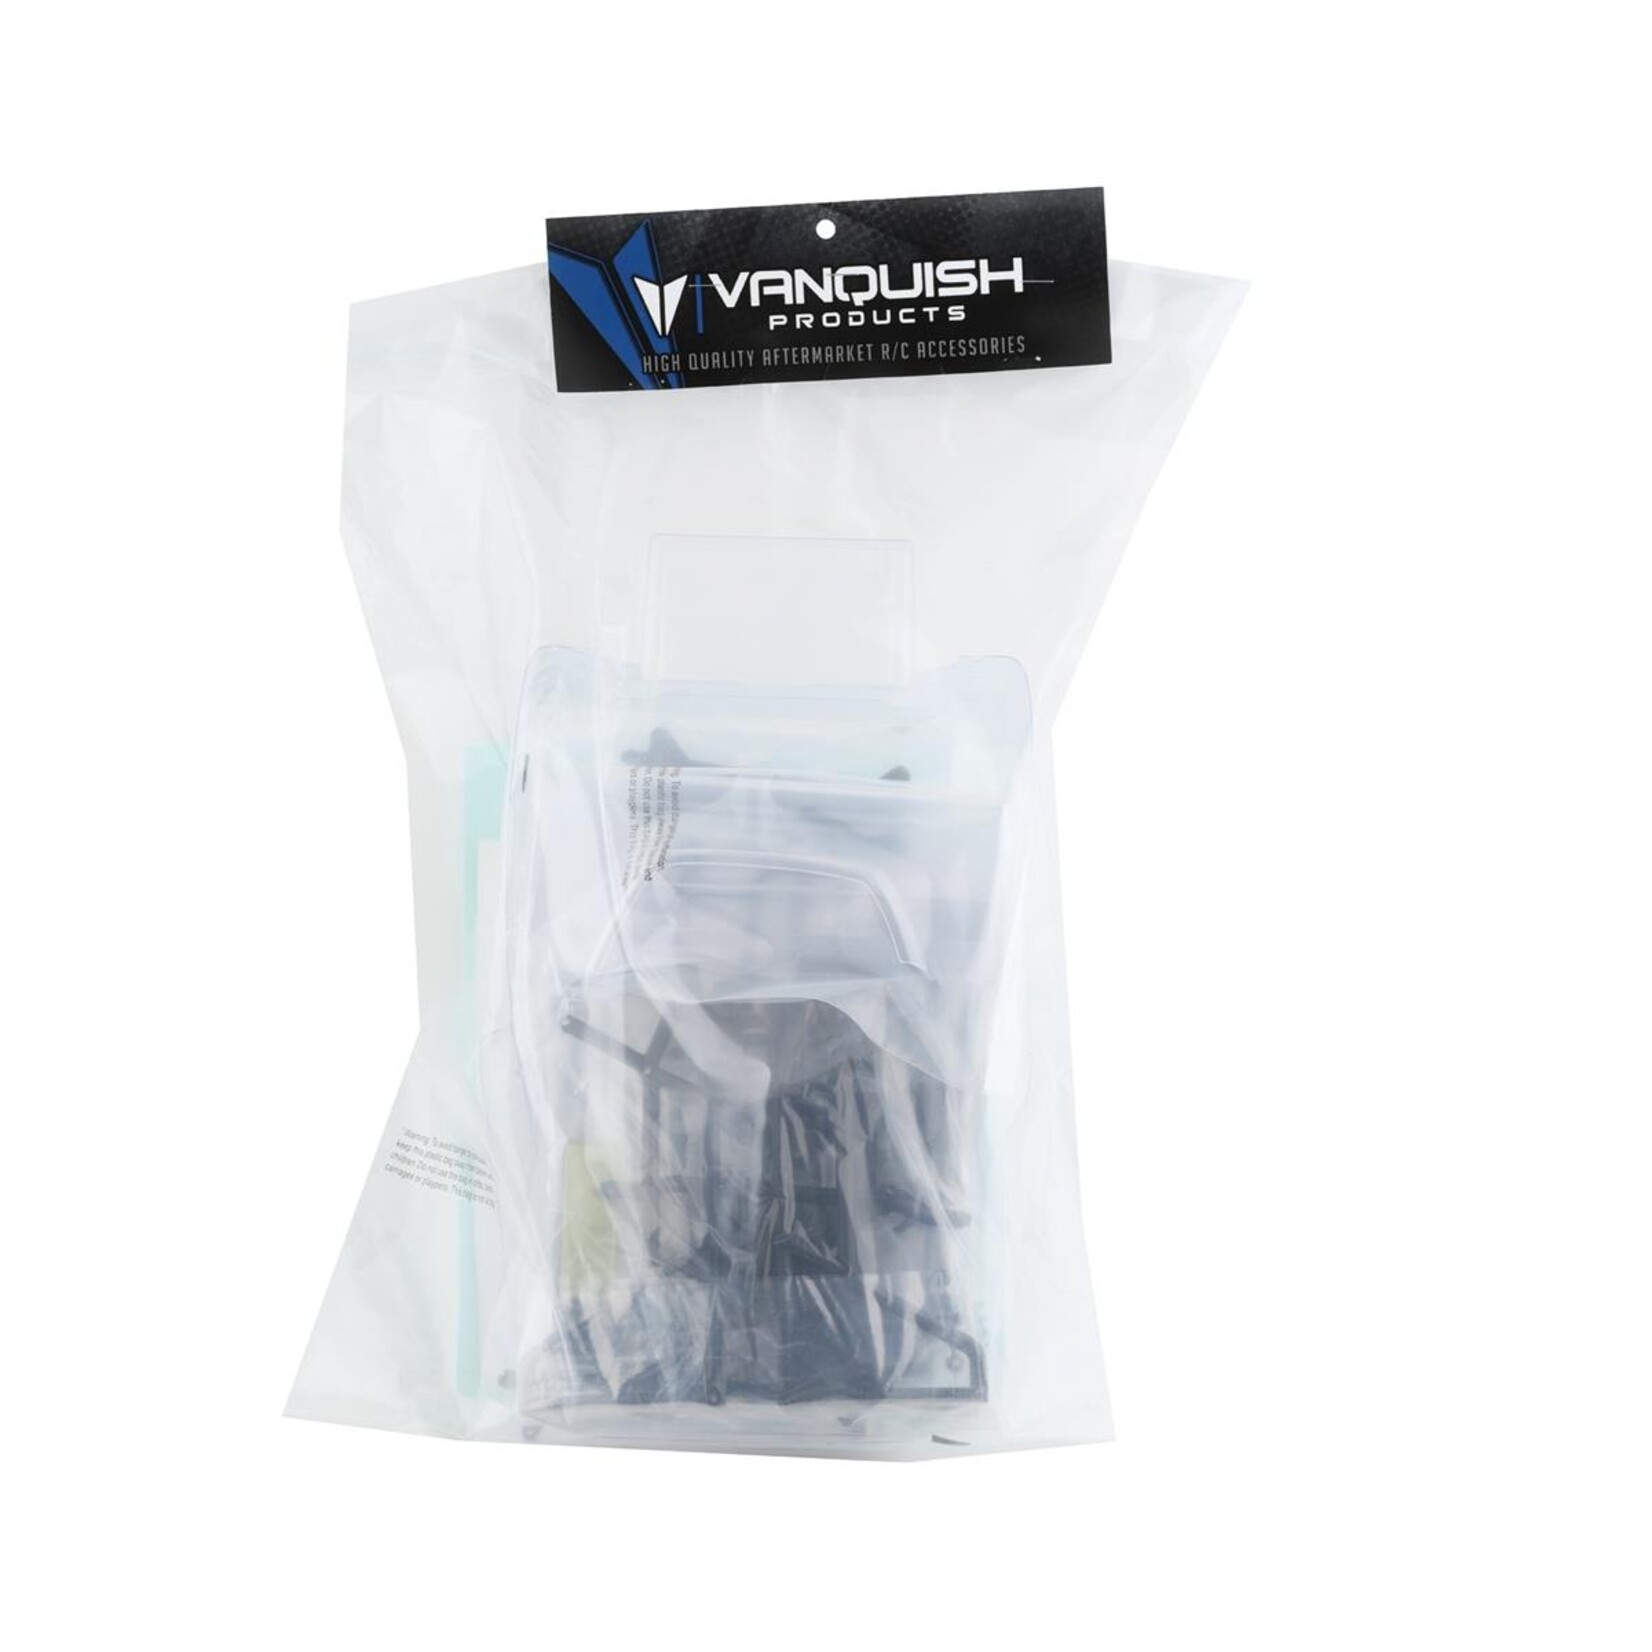 Vanquish Products Vanquish Products PHOENIX BODY SET W/VRD1 CAGE # VPS10133